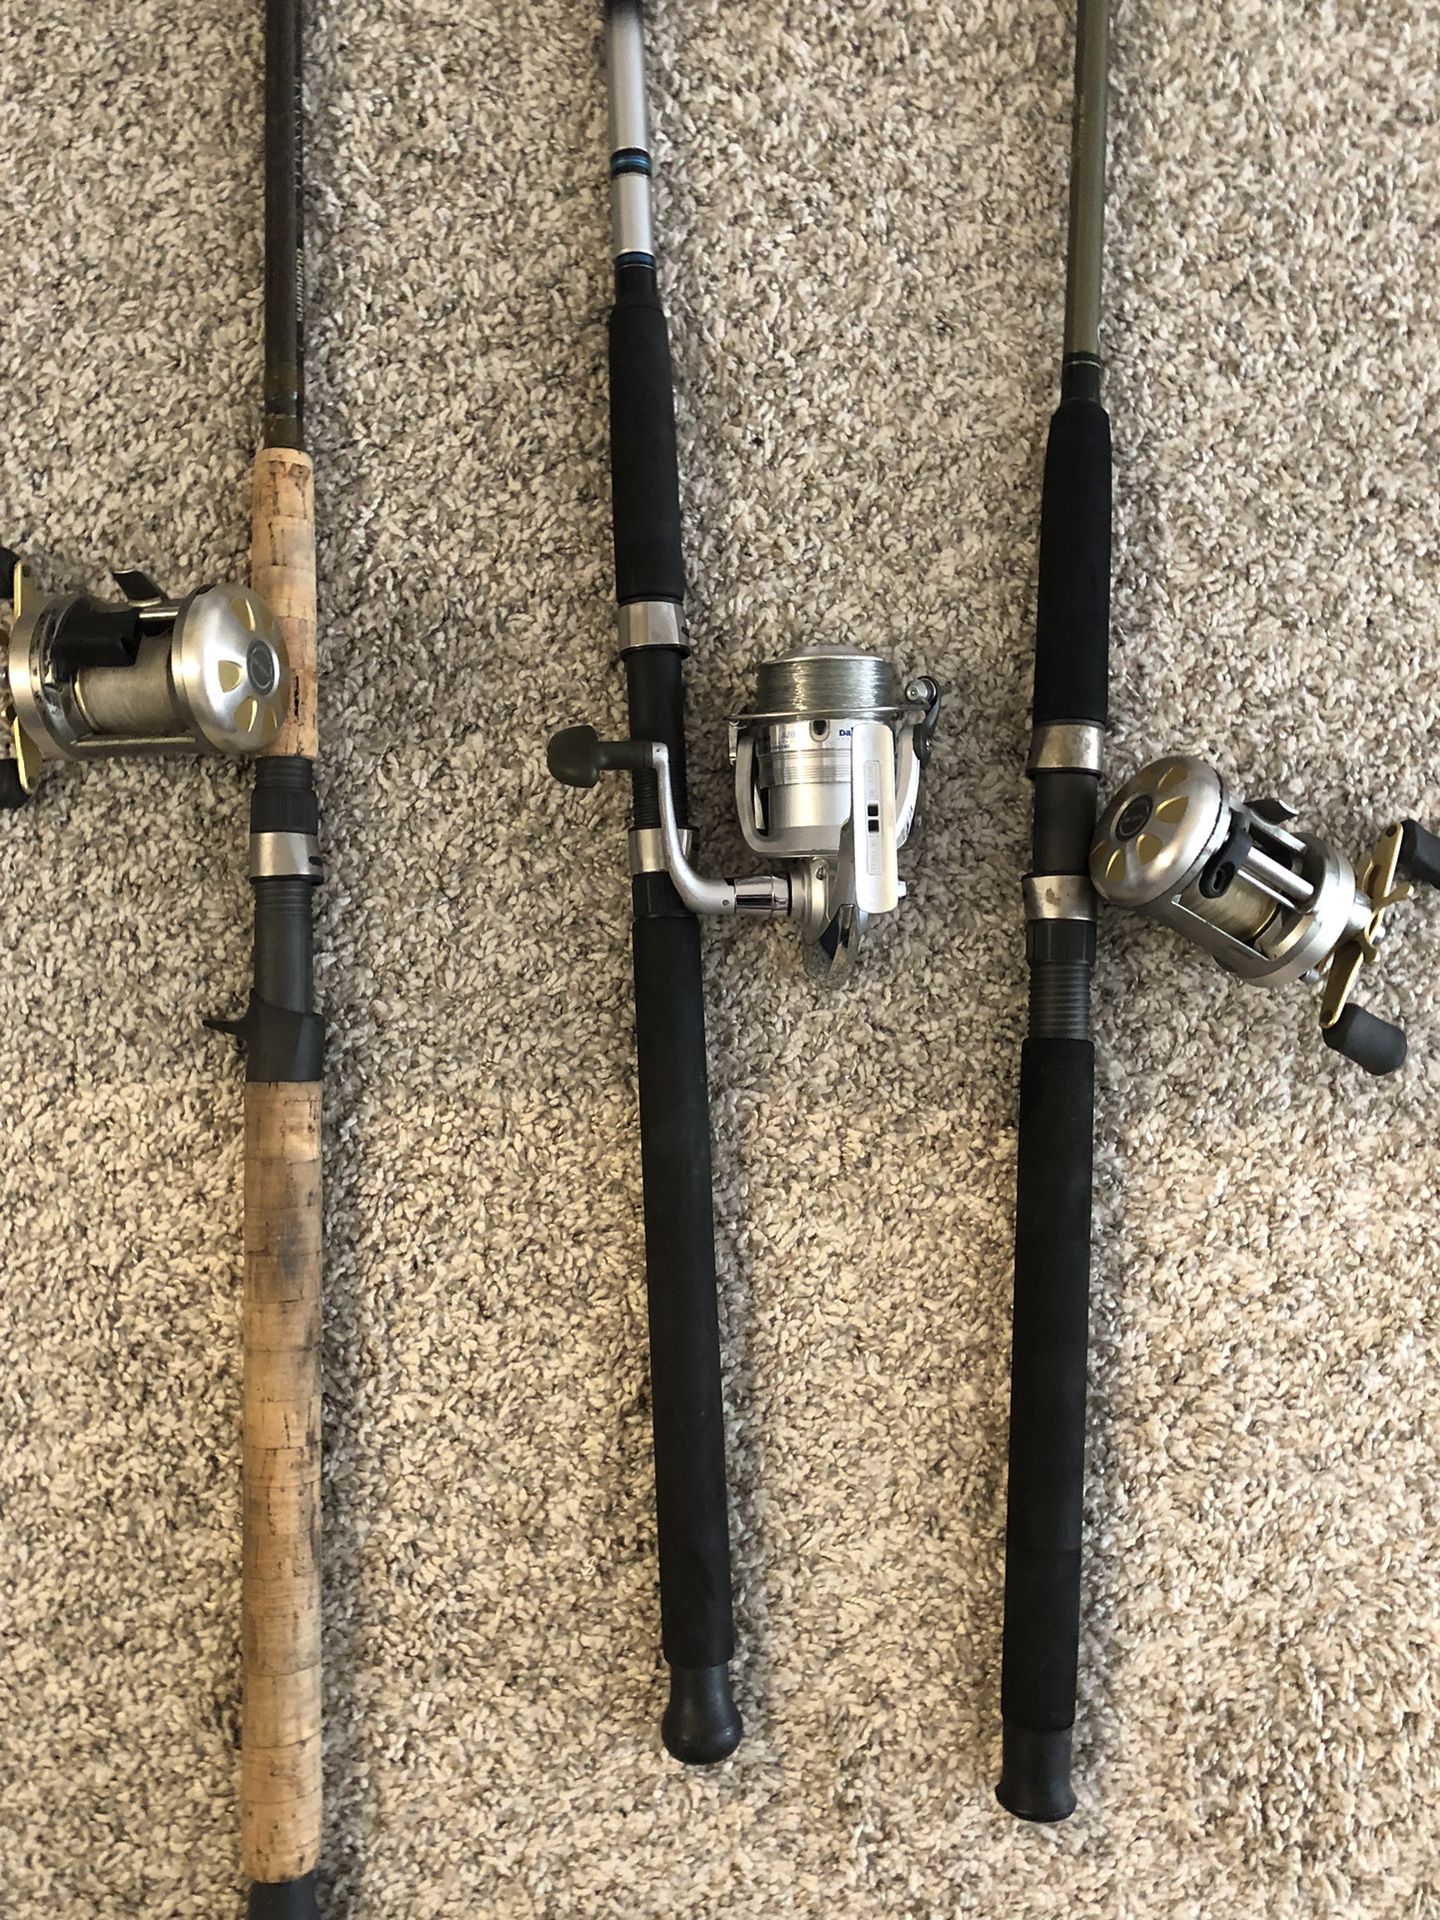 Three Fishing Poles With Reels